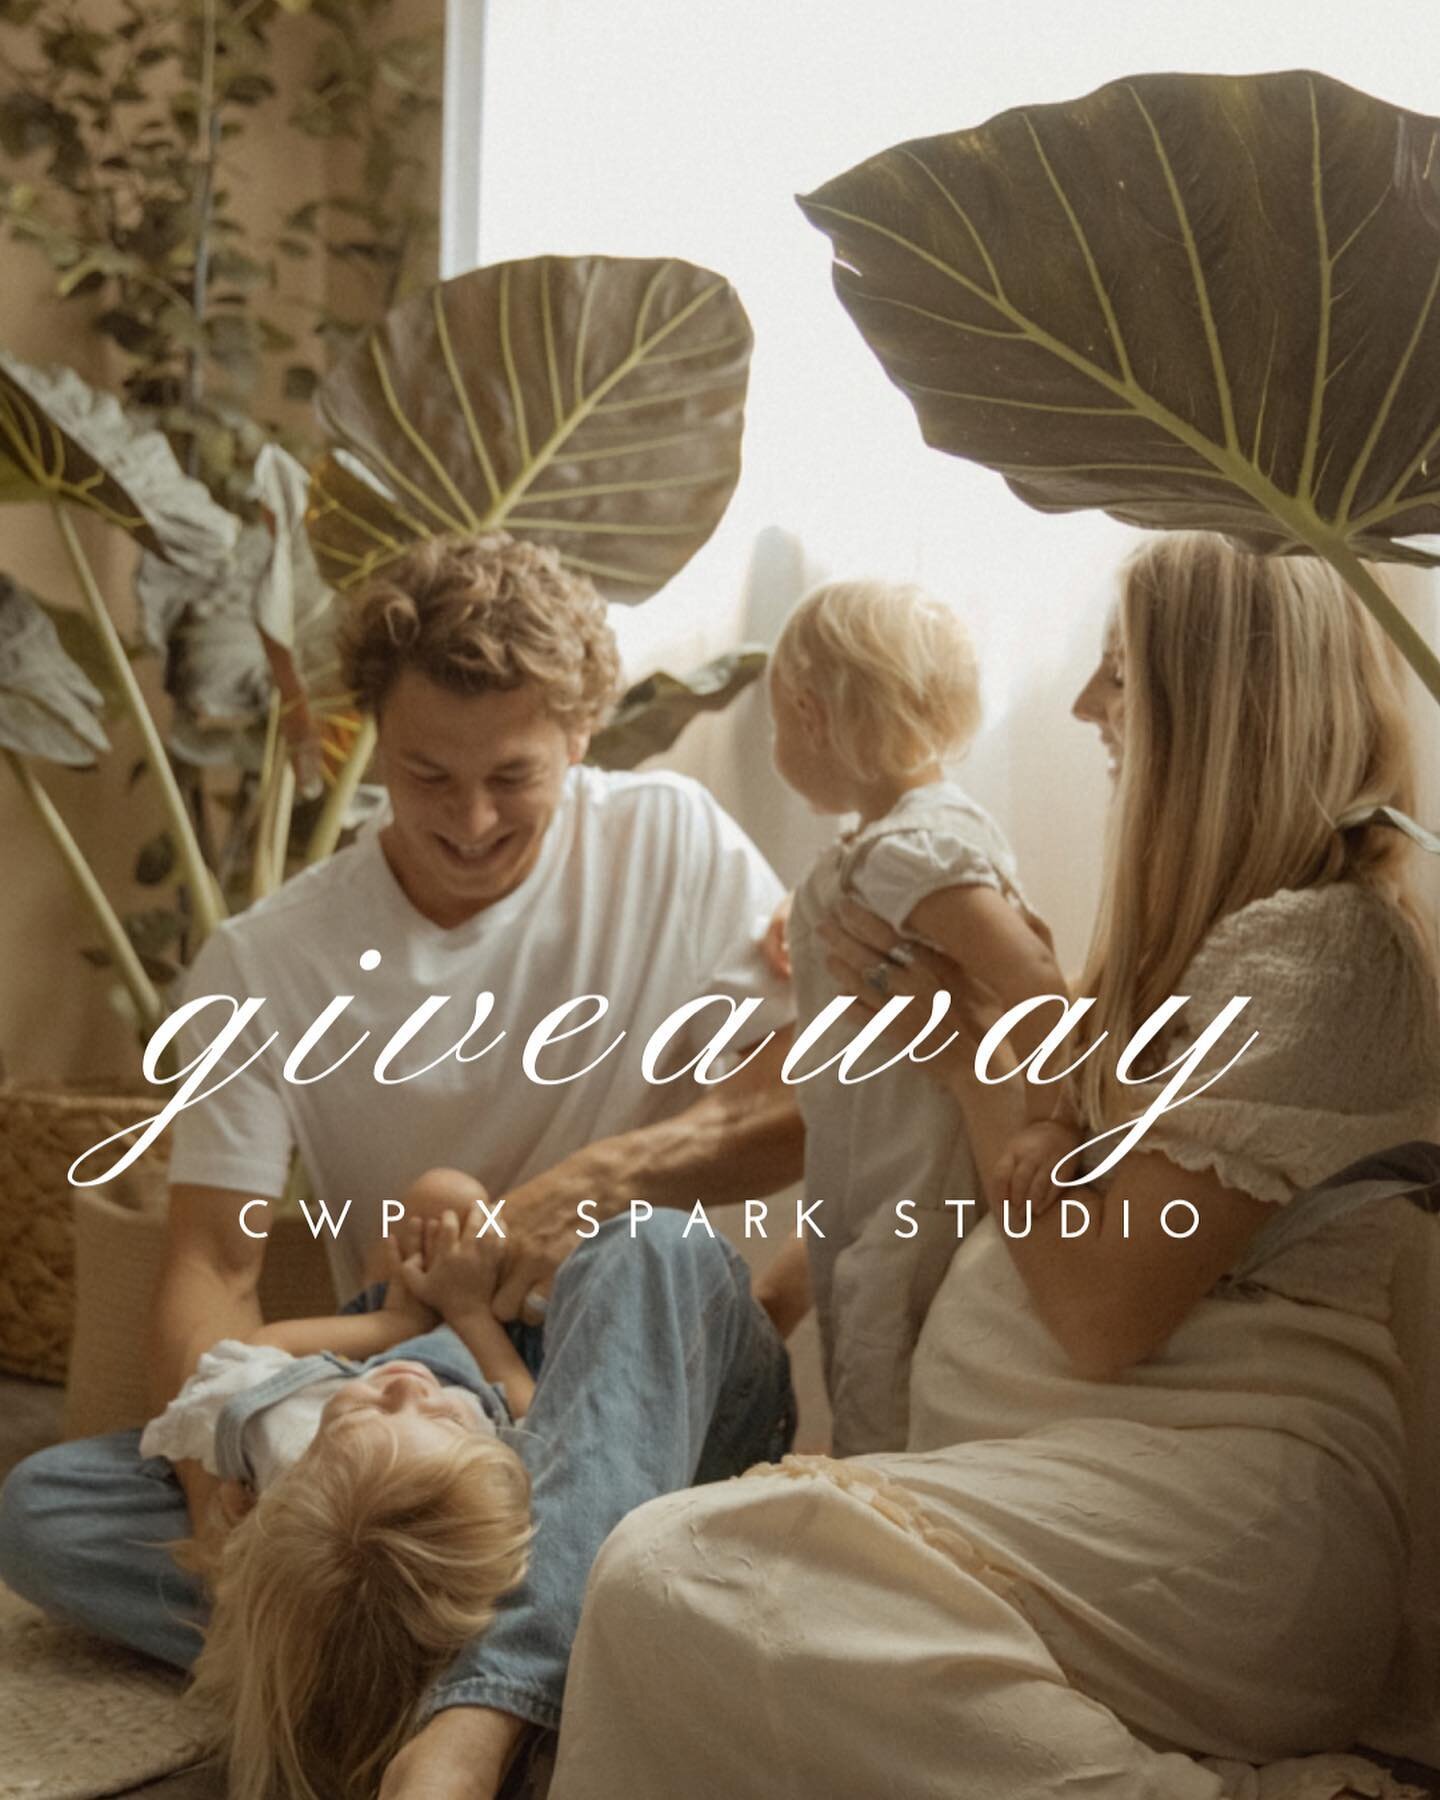 **PHOTOSHOOT GIVEAWAY** I'm so excited to partner with Spark Studios and give away a photo shoot in their brand-new studio, The Bungalow! I'm gifting a one-hour (insert the type of shoot(s) you're giving away) photo shoot in this gorgeous space and y